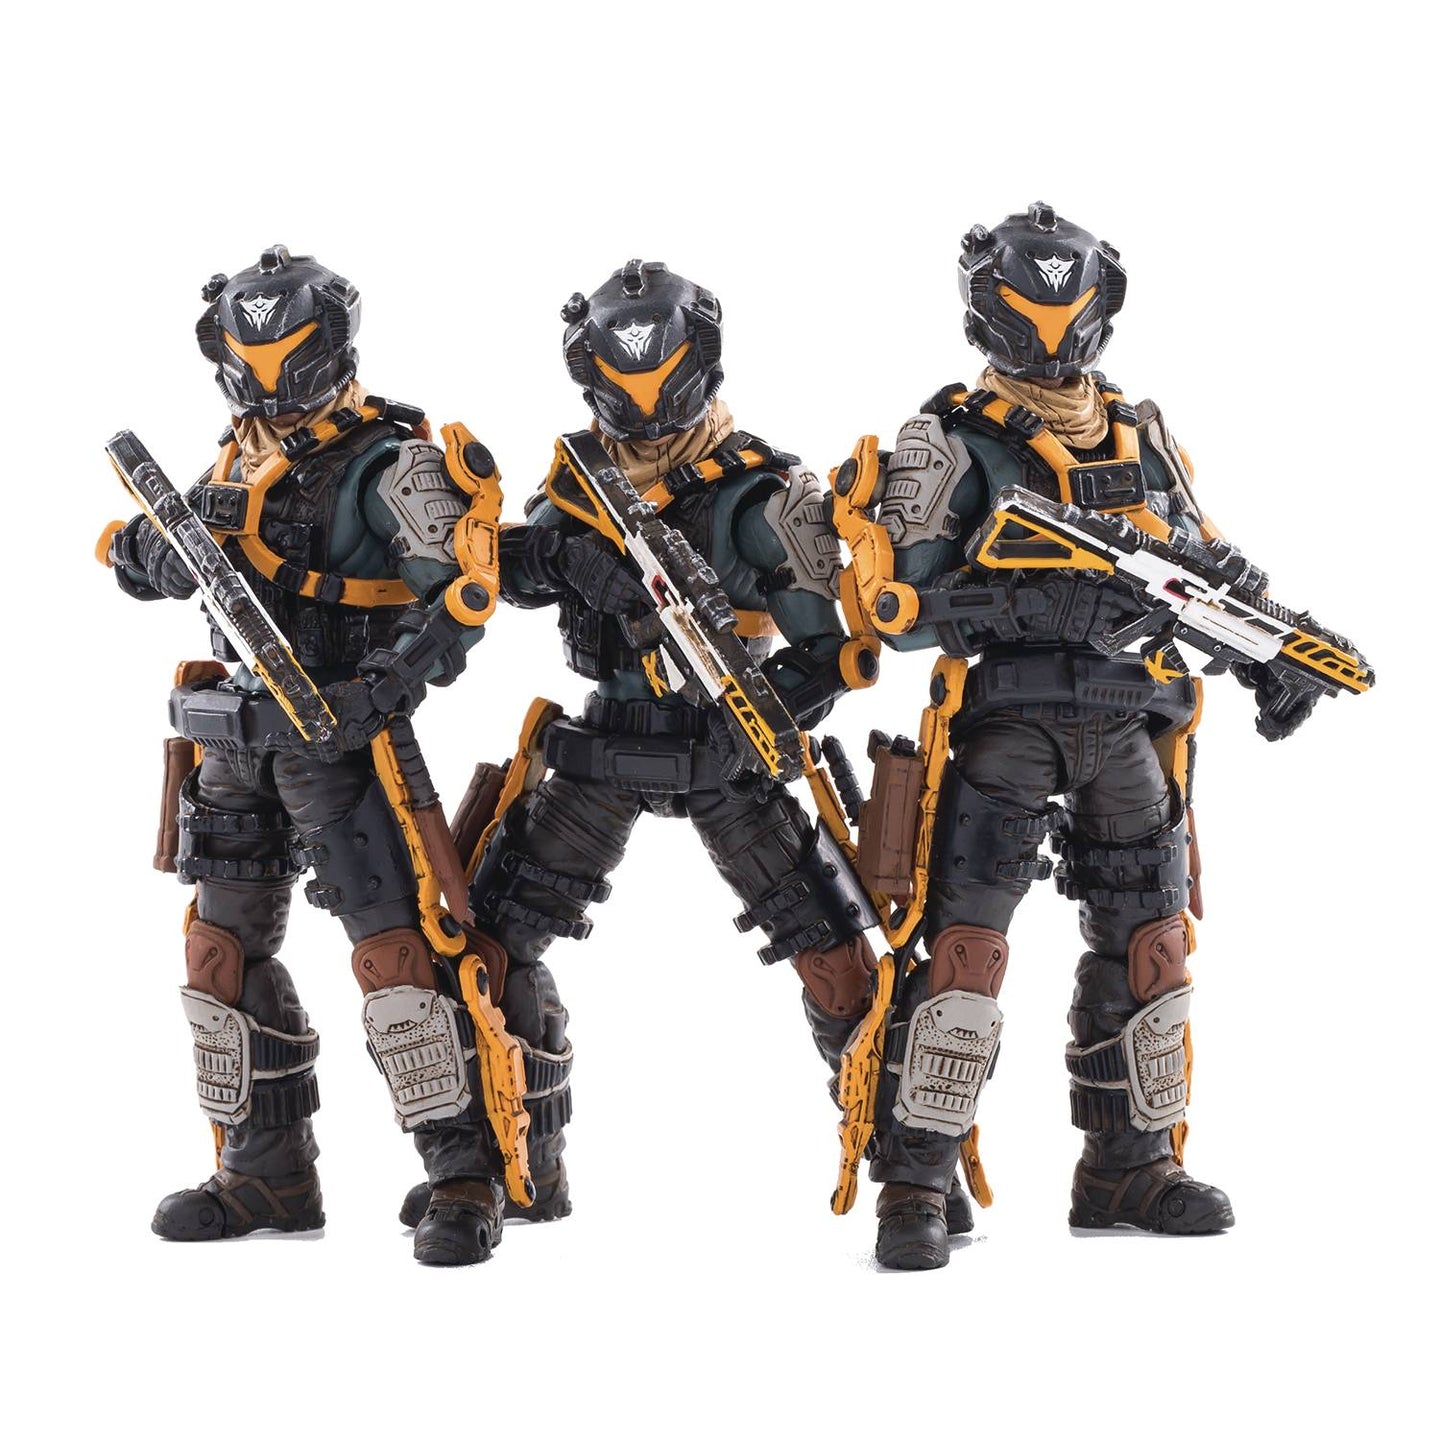 Joy Toy 19ST Legion Ghost United 1/18 Figure 3 Pack with Weapons Crate, Rocket Launcher, Machine Gun, Drone, and Tablet accessories